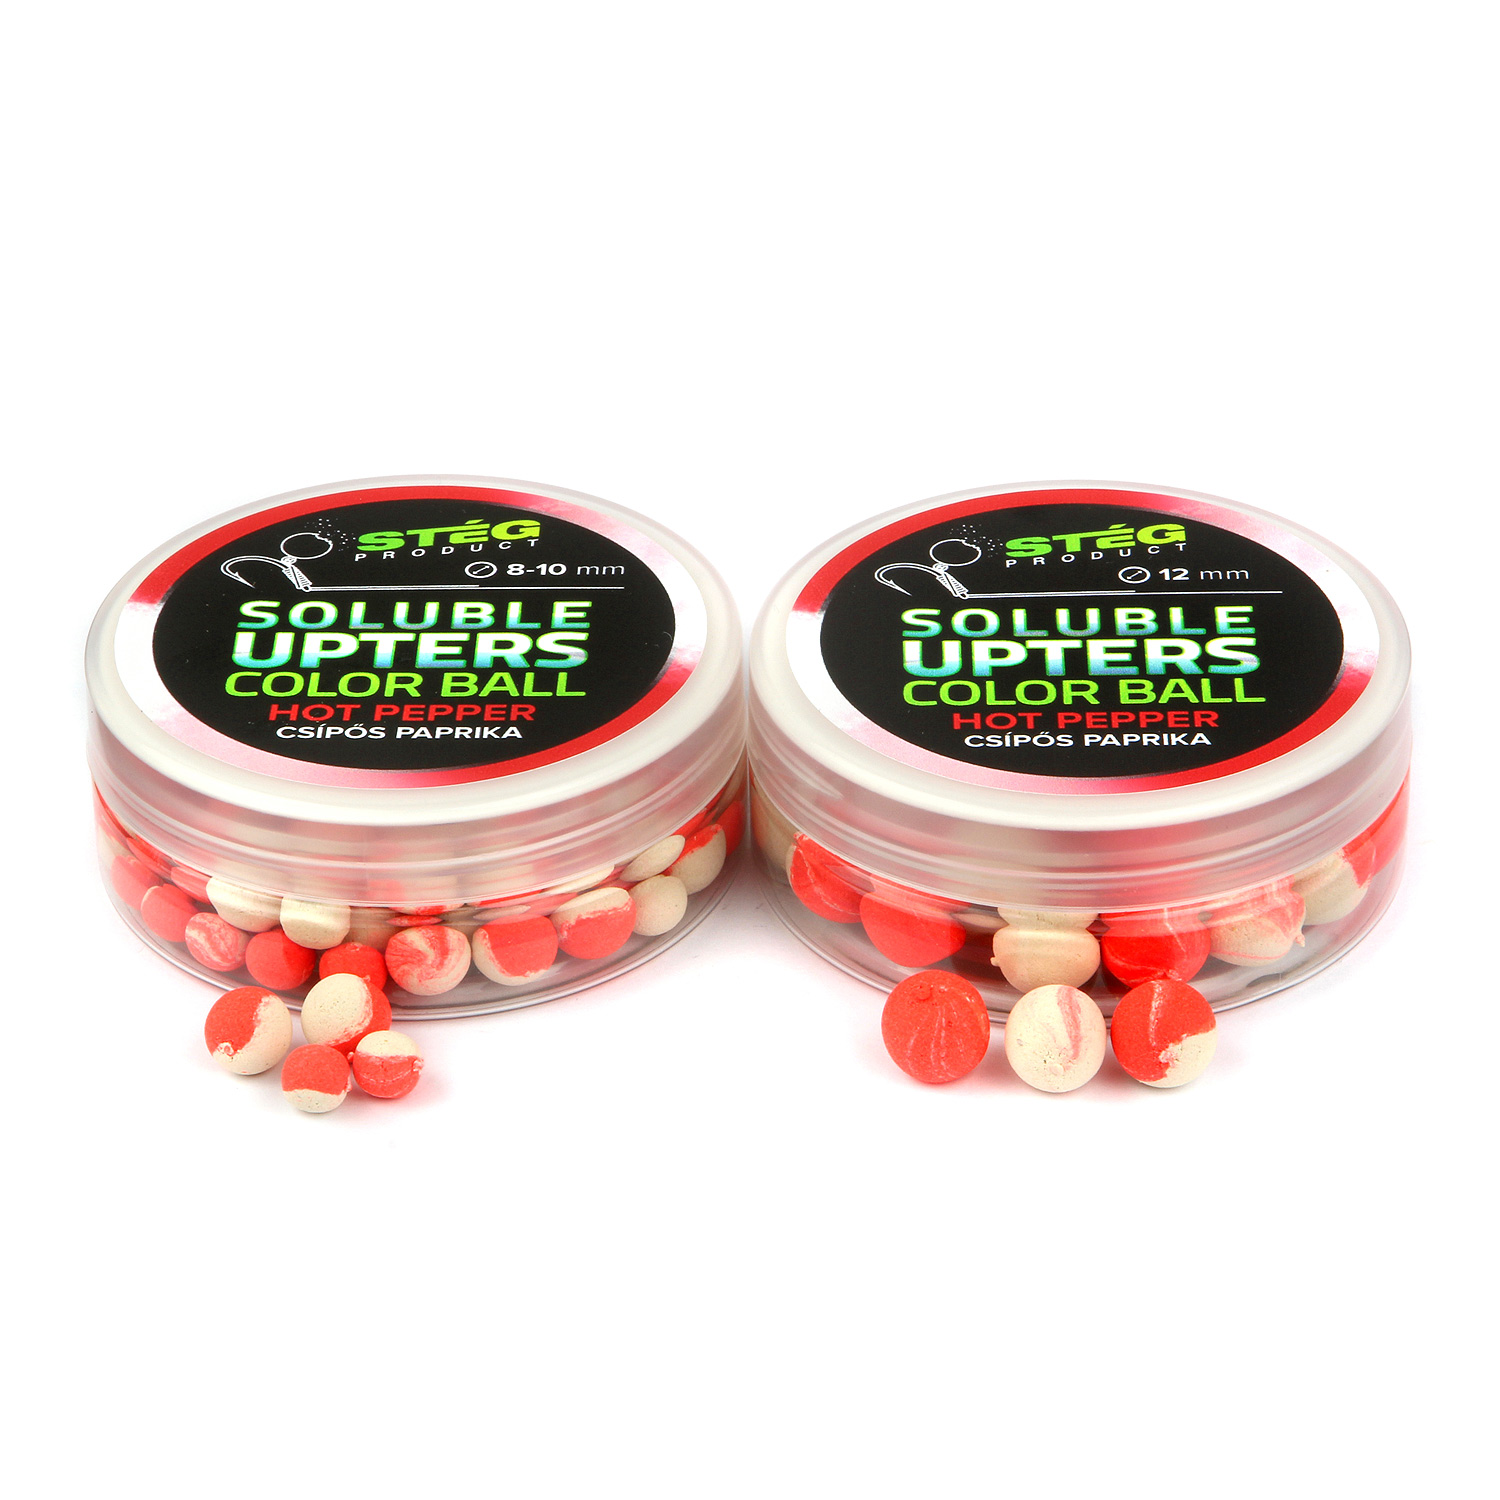 Stg Product Soluble Upters Color Ball 8-10mm Hot Pepper 30g